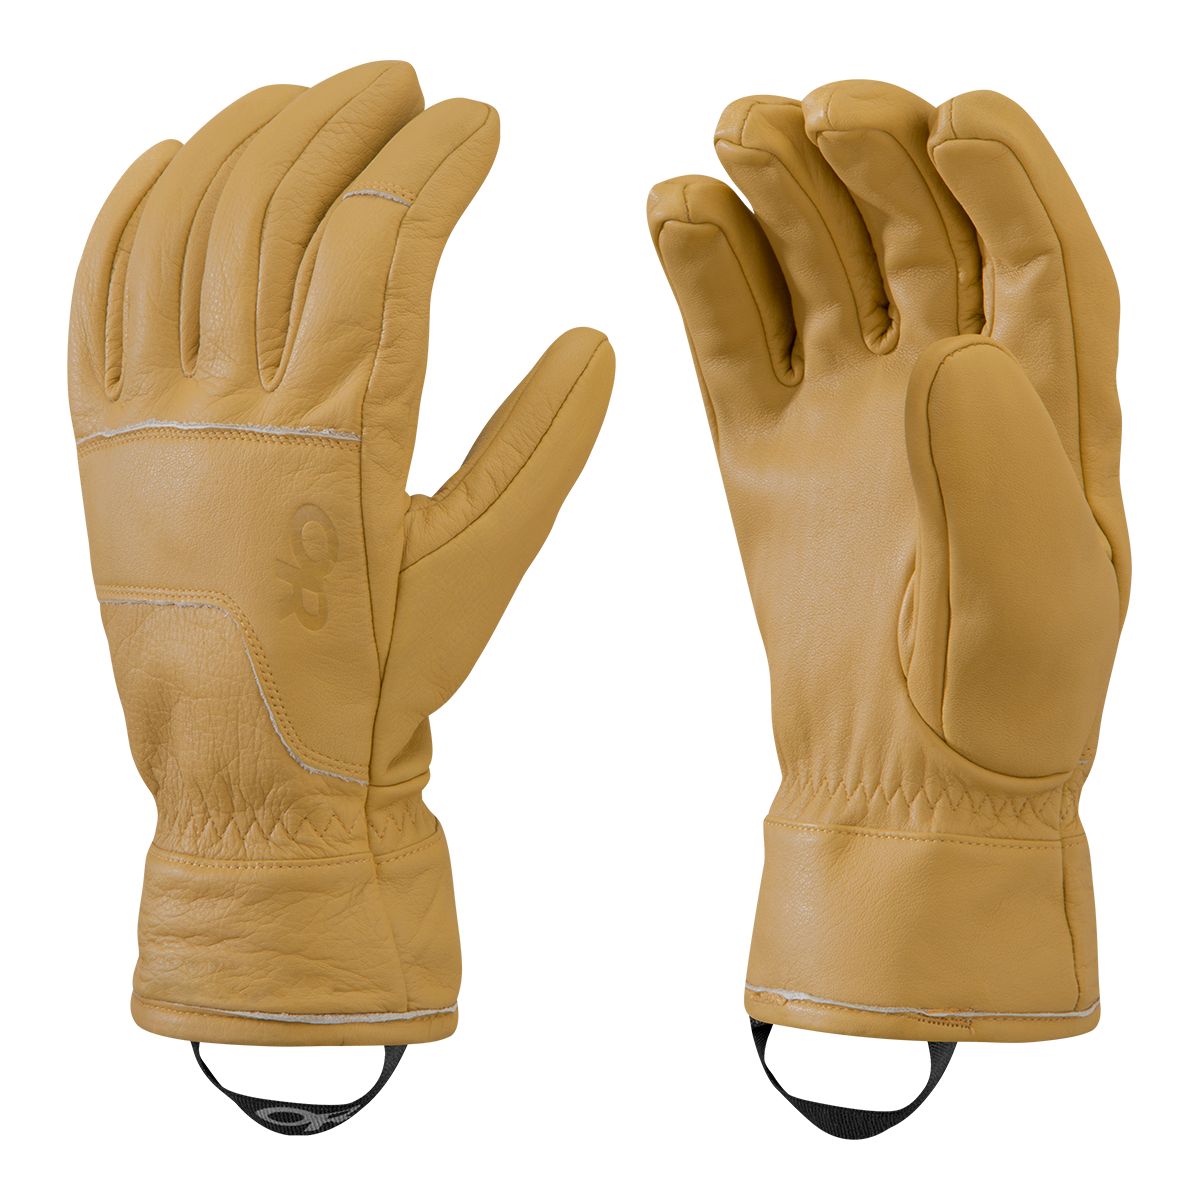 Image of Outdoor Research Men's Arkell Work Winter Gloves